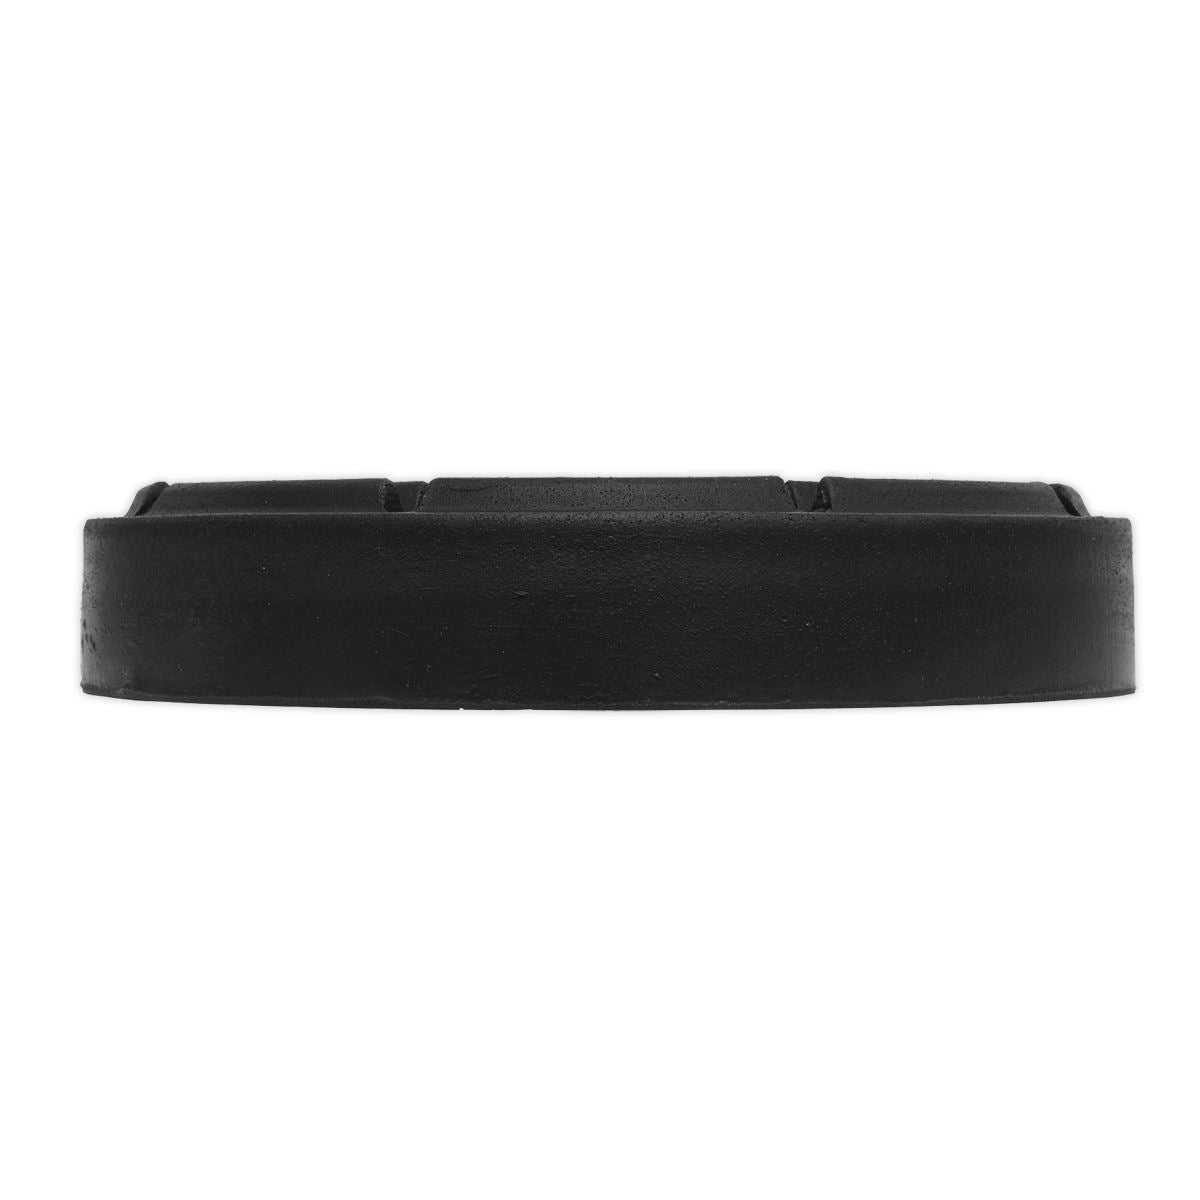 Sealey Safety Rubber Trolley Jack Pad Type A To Fit 138-142mm Saddle